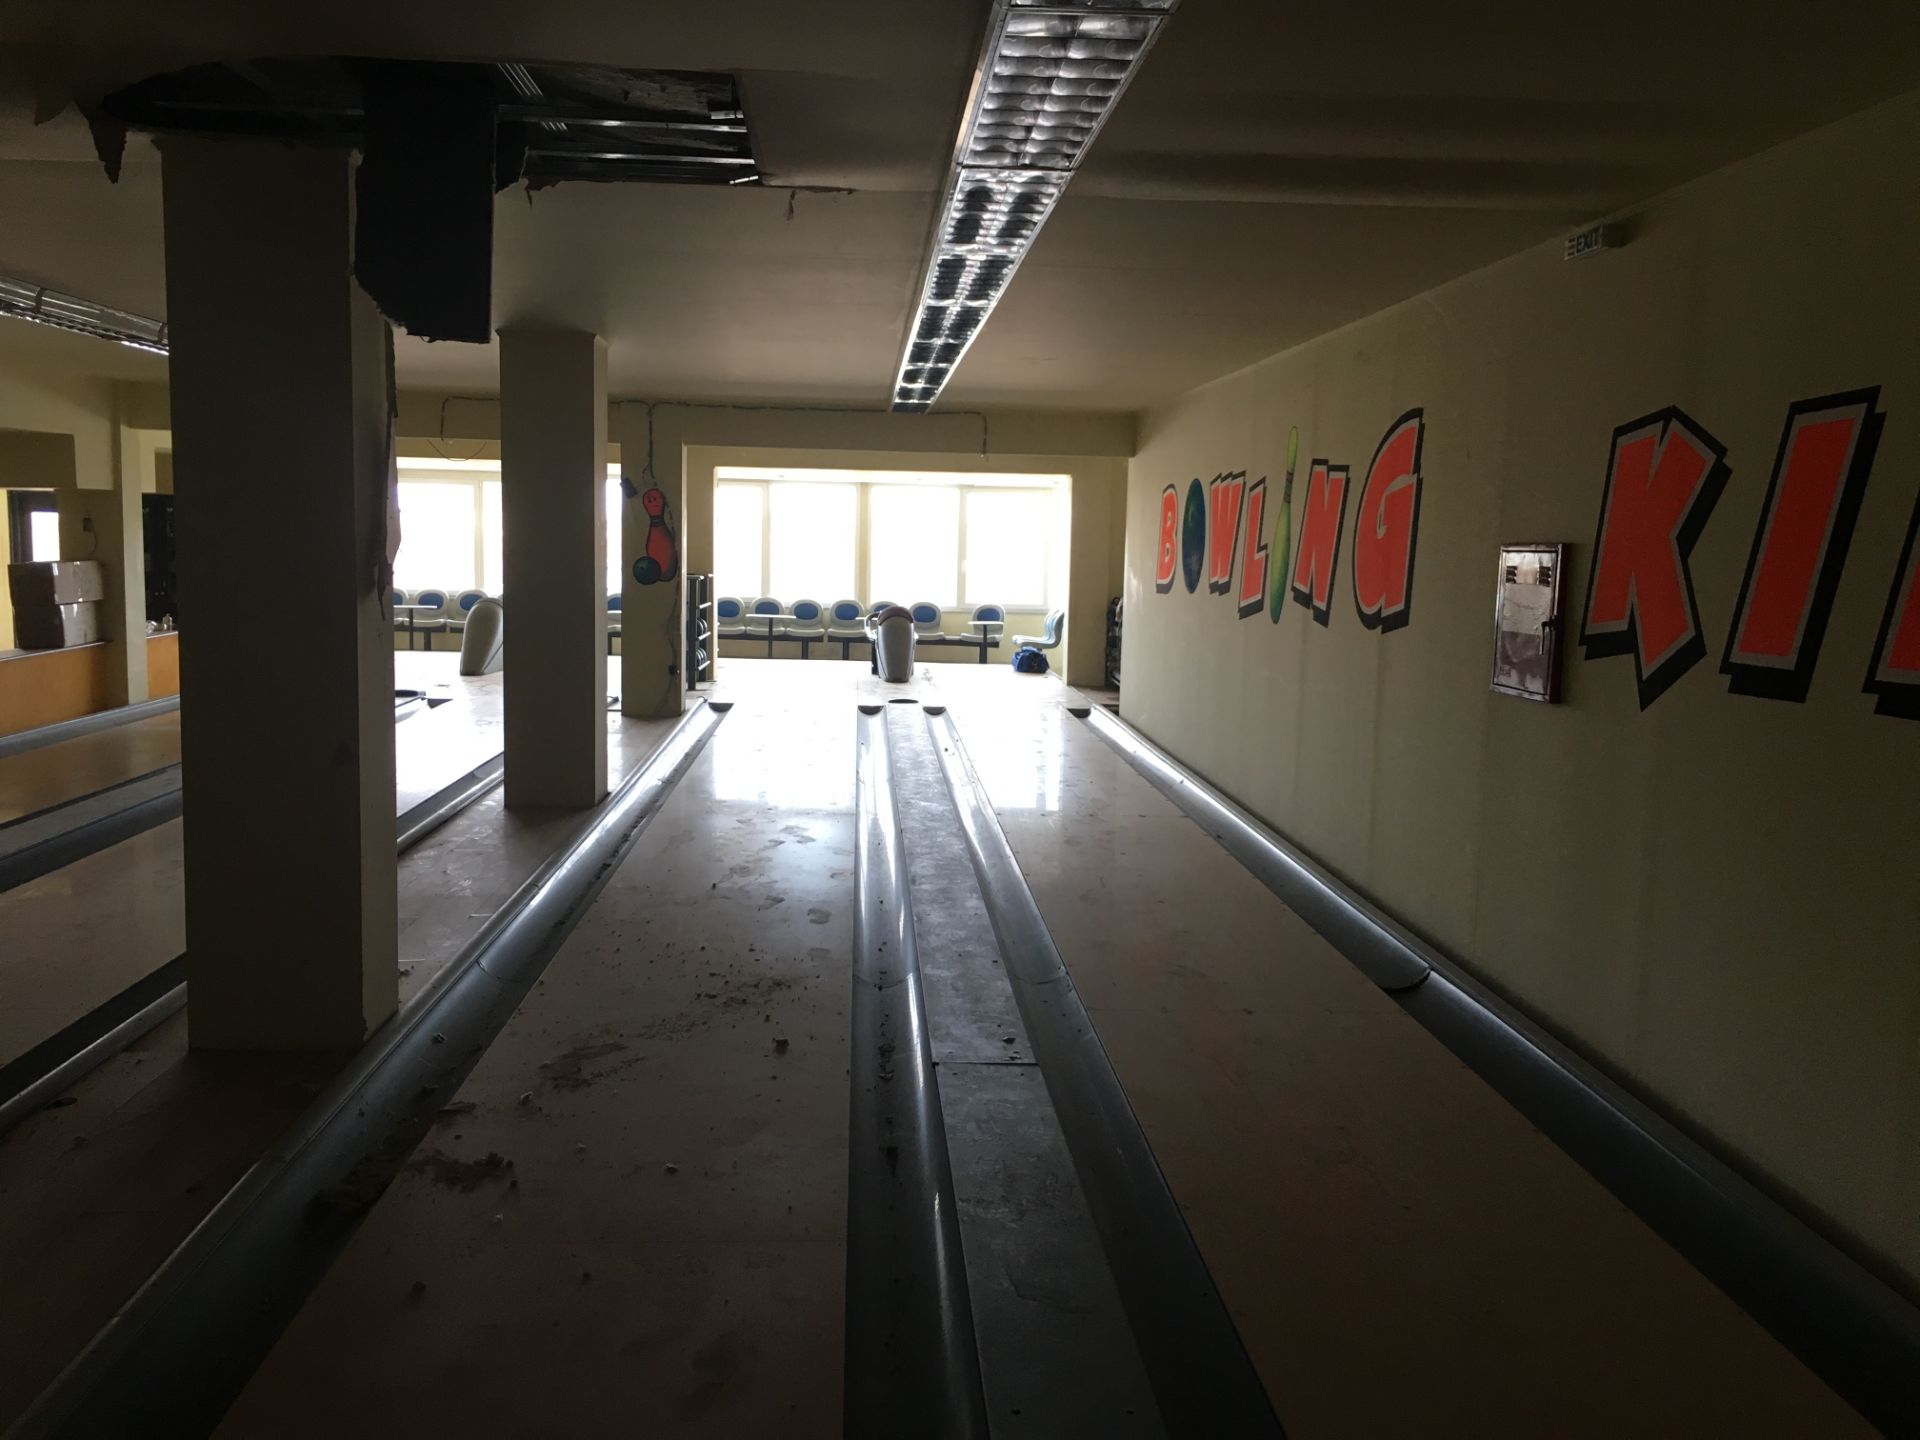 Complete Bowling Facility 4 Lanes Brunswick ( Building Not for Sale) - Image 31 of 86